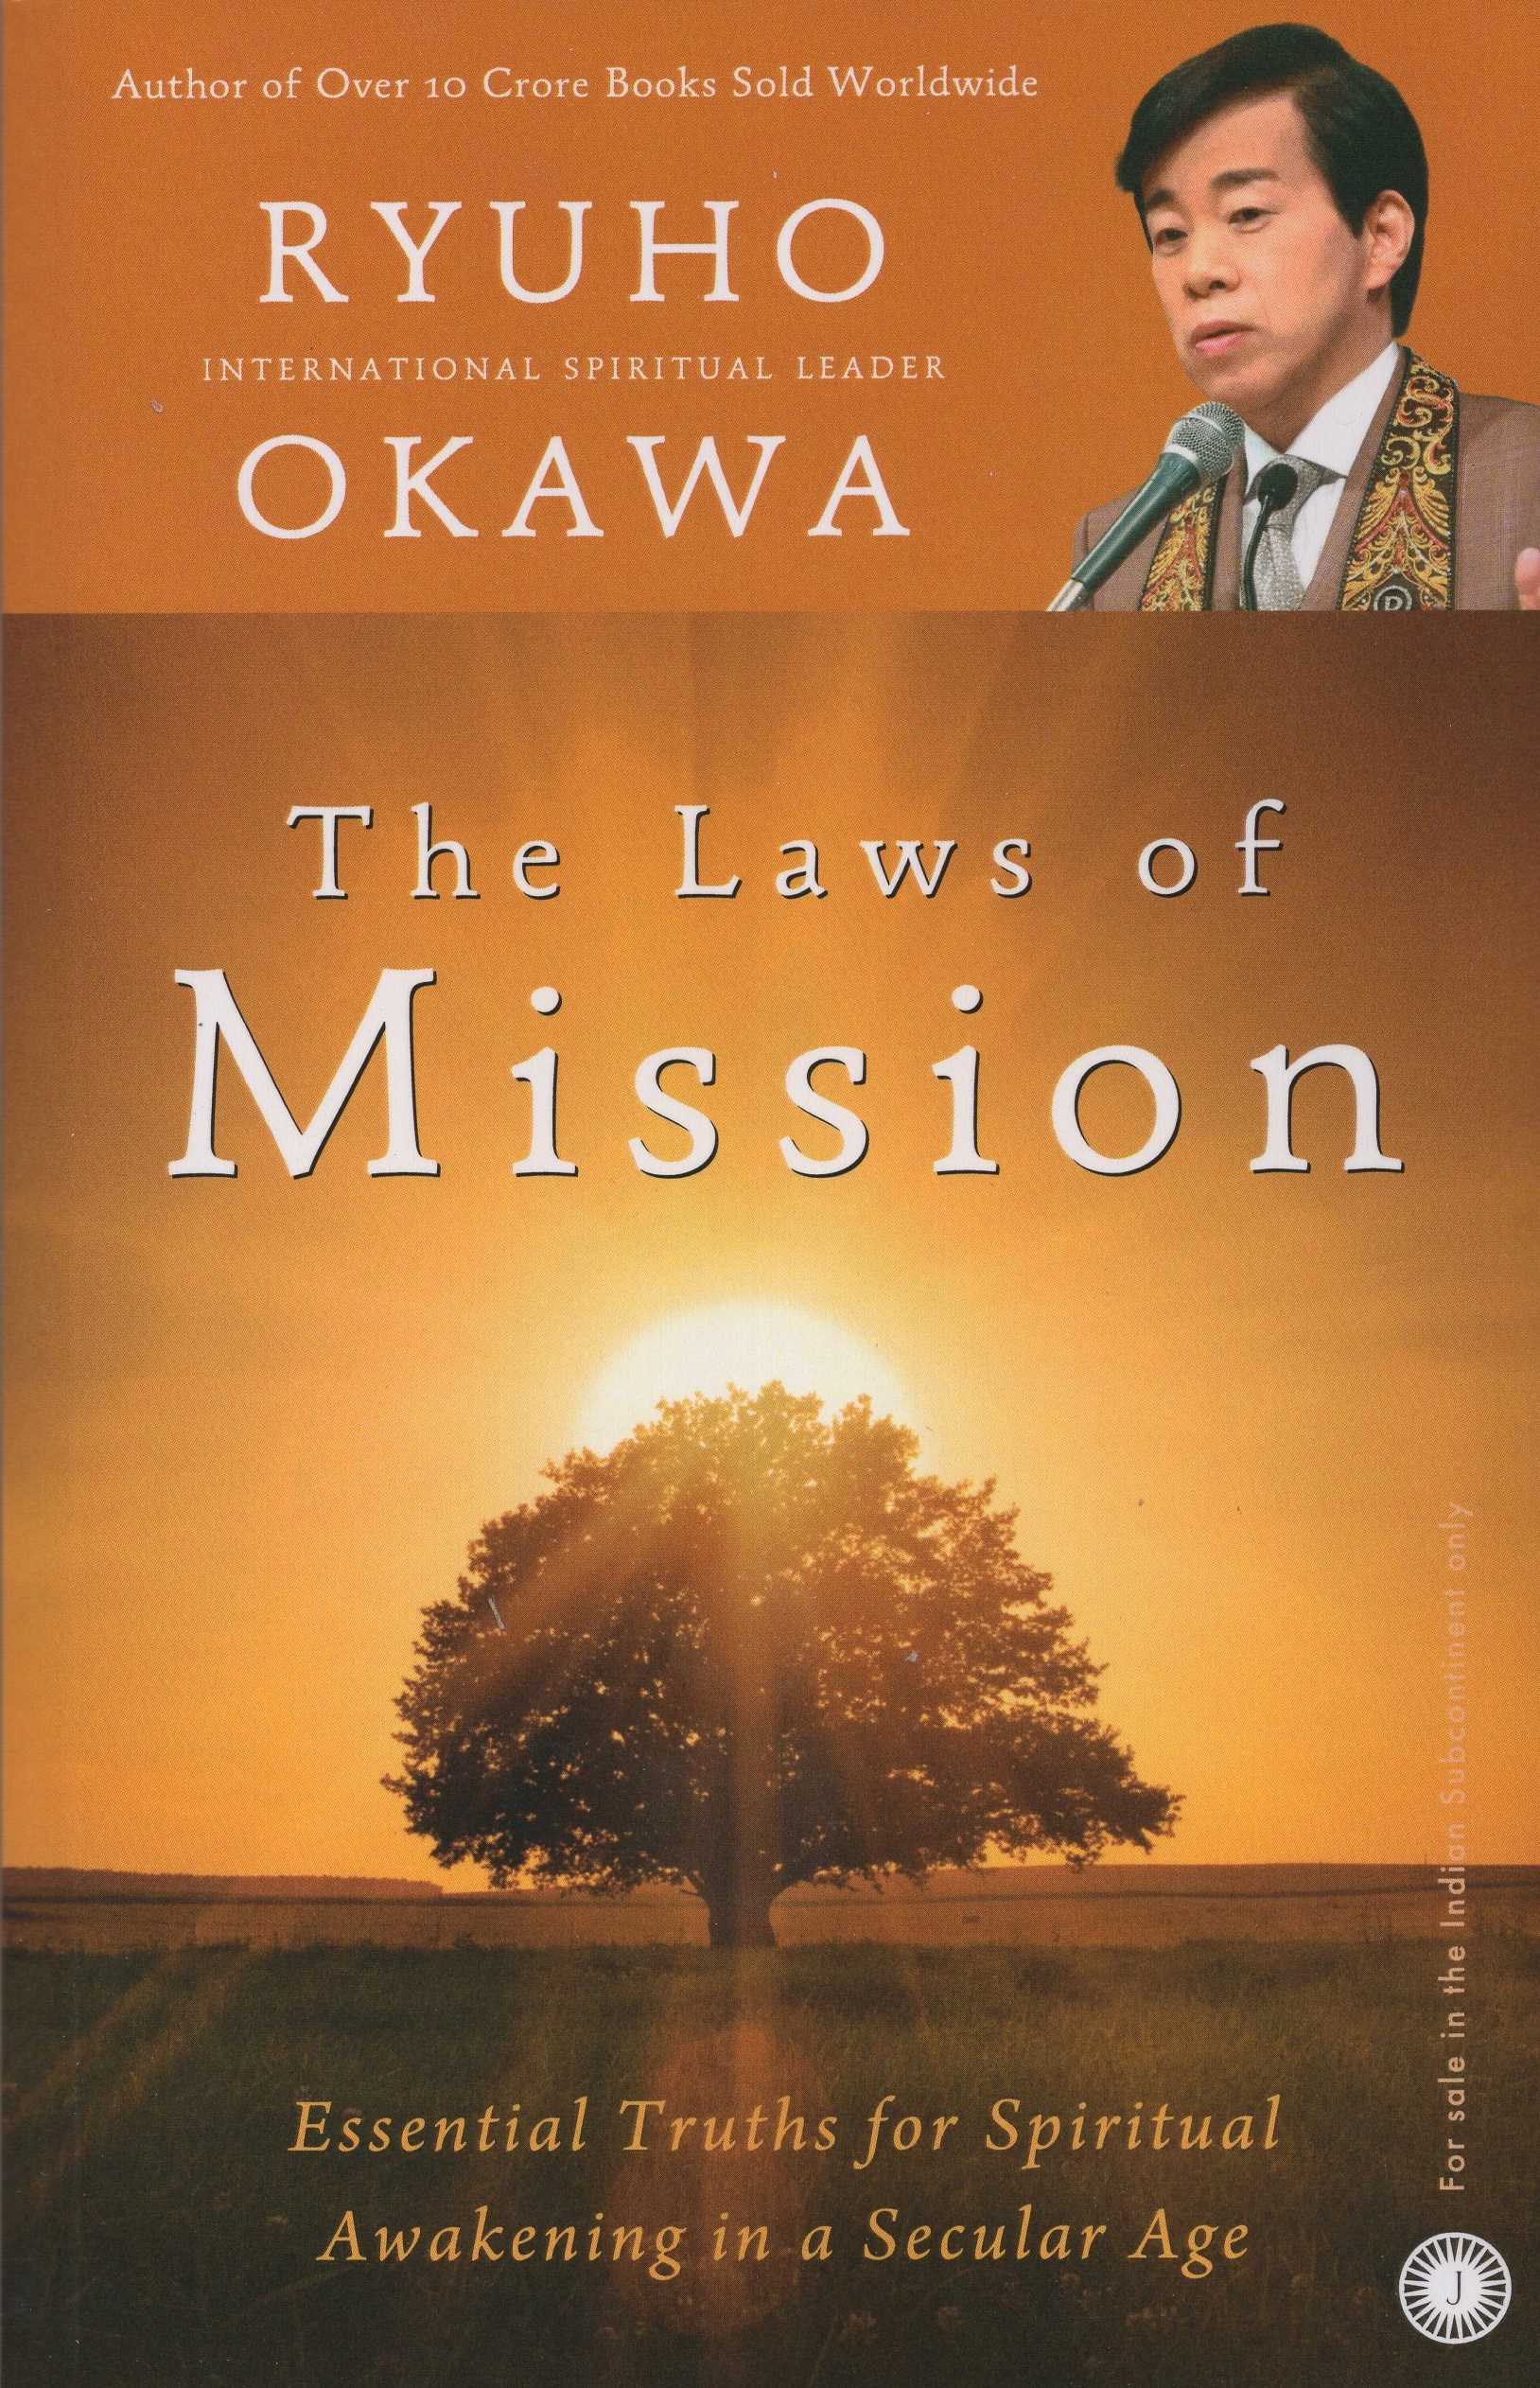 THE LAWS OF MISSION